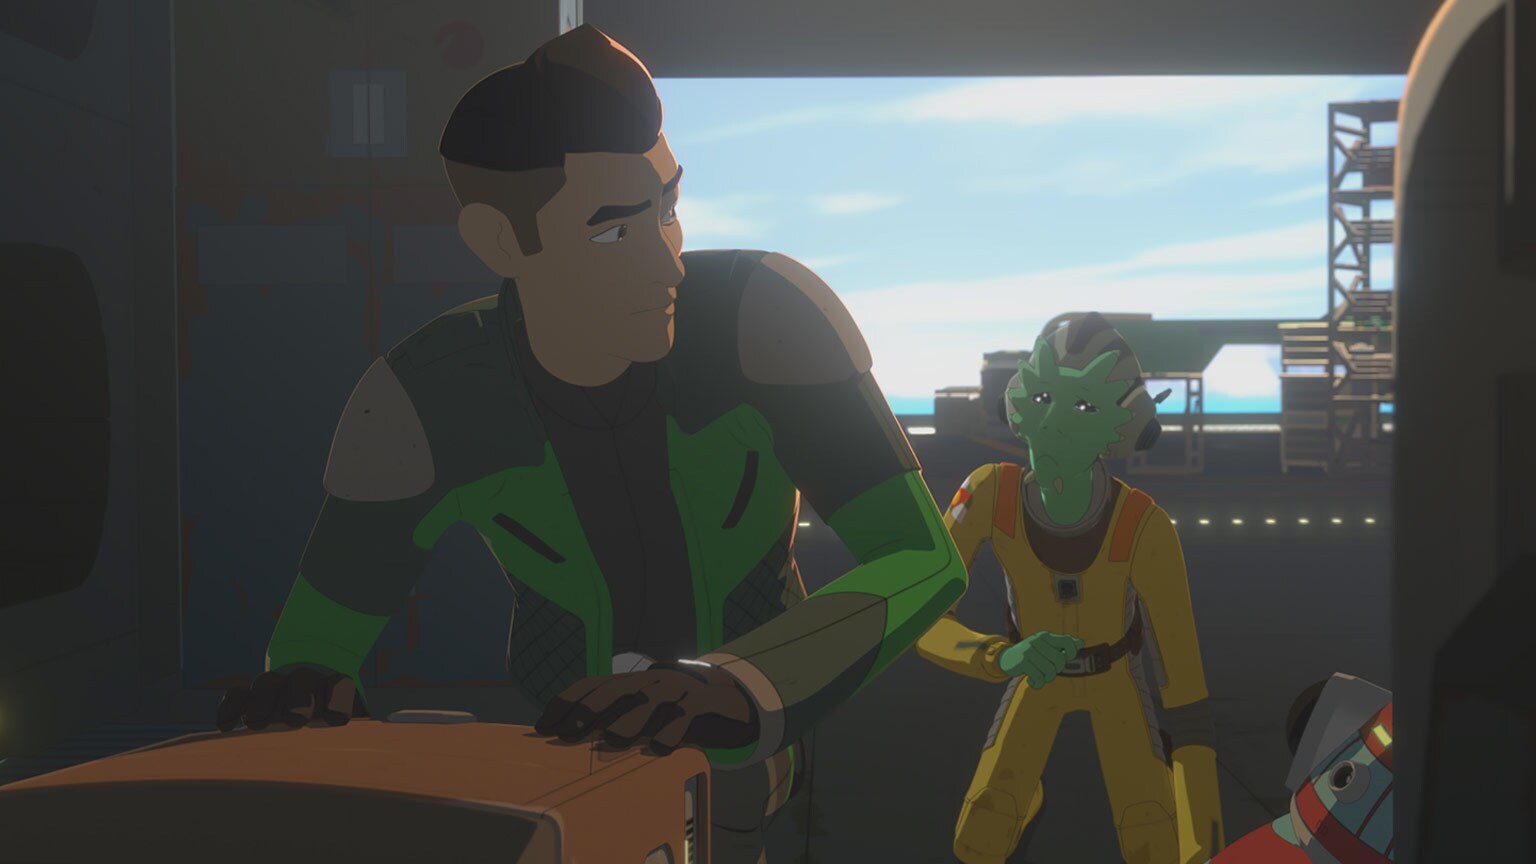 Bucket's List Extra: 6 Fun Facts from "No Place Safe" - Star Wars Resistance